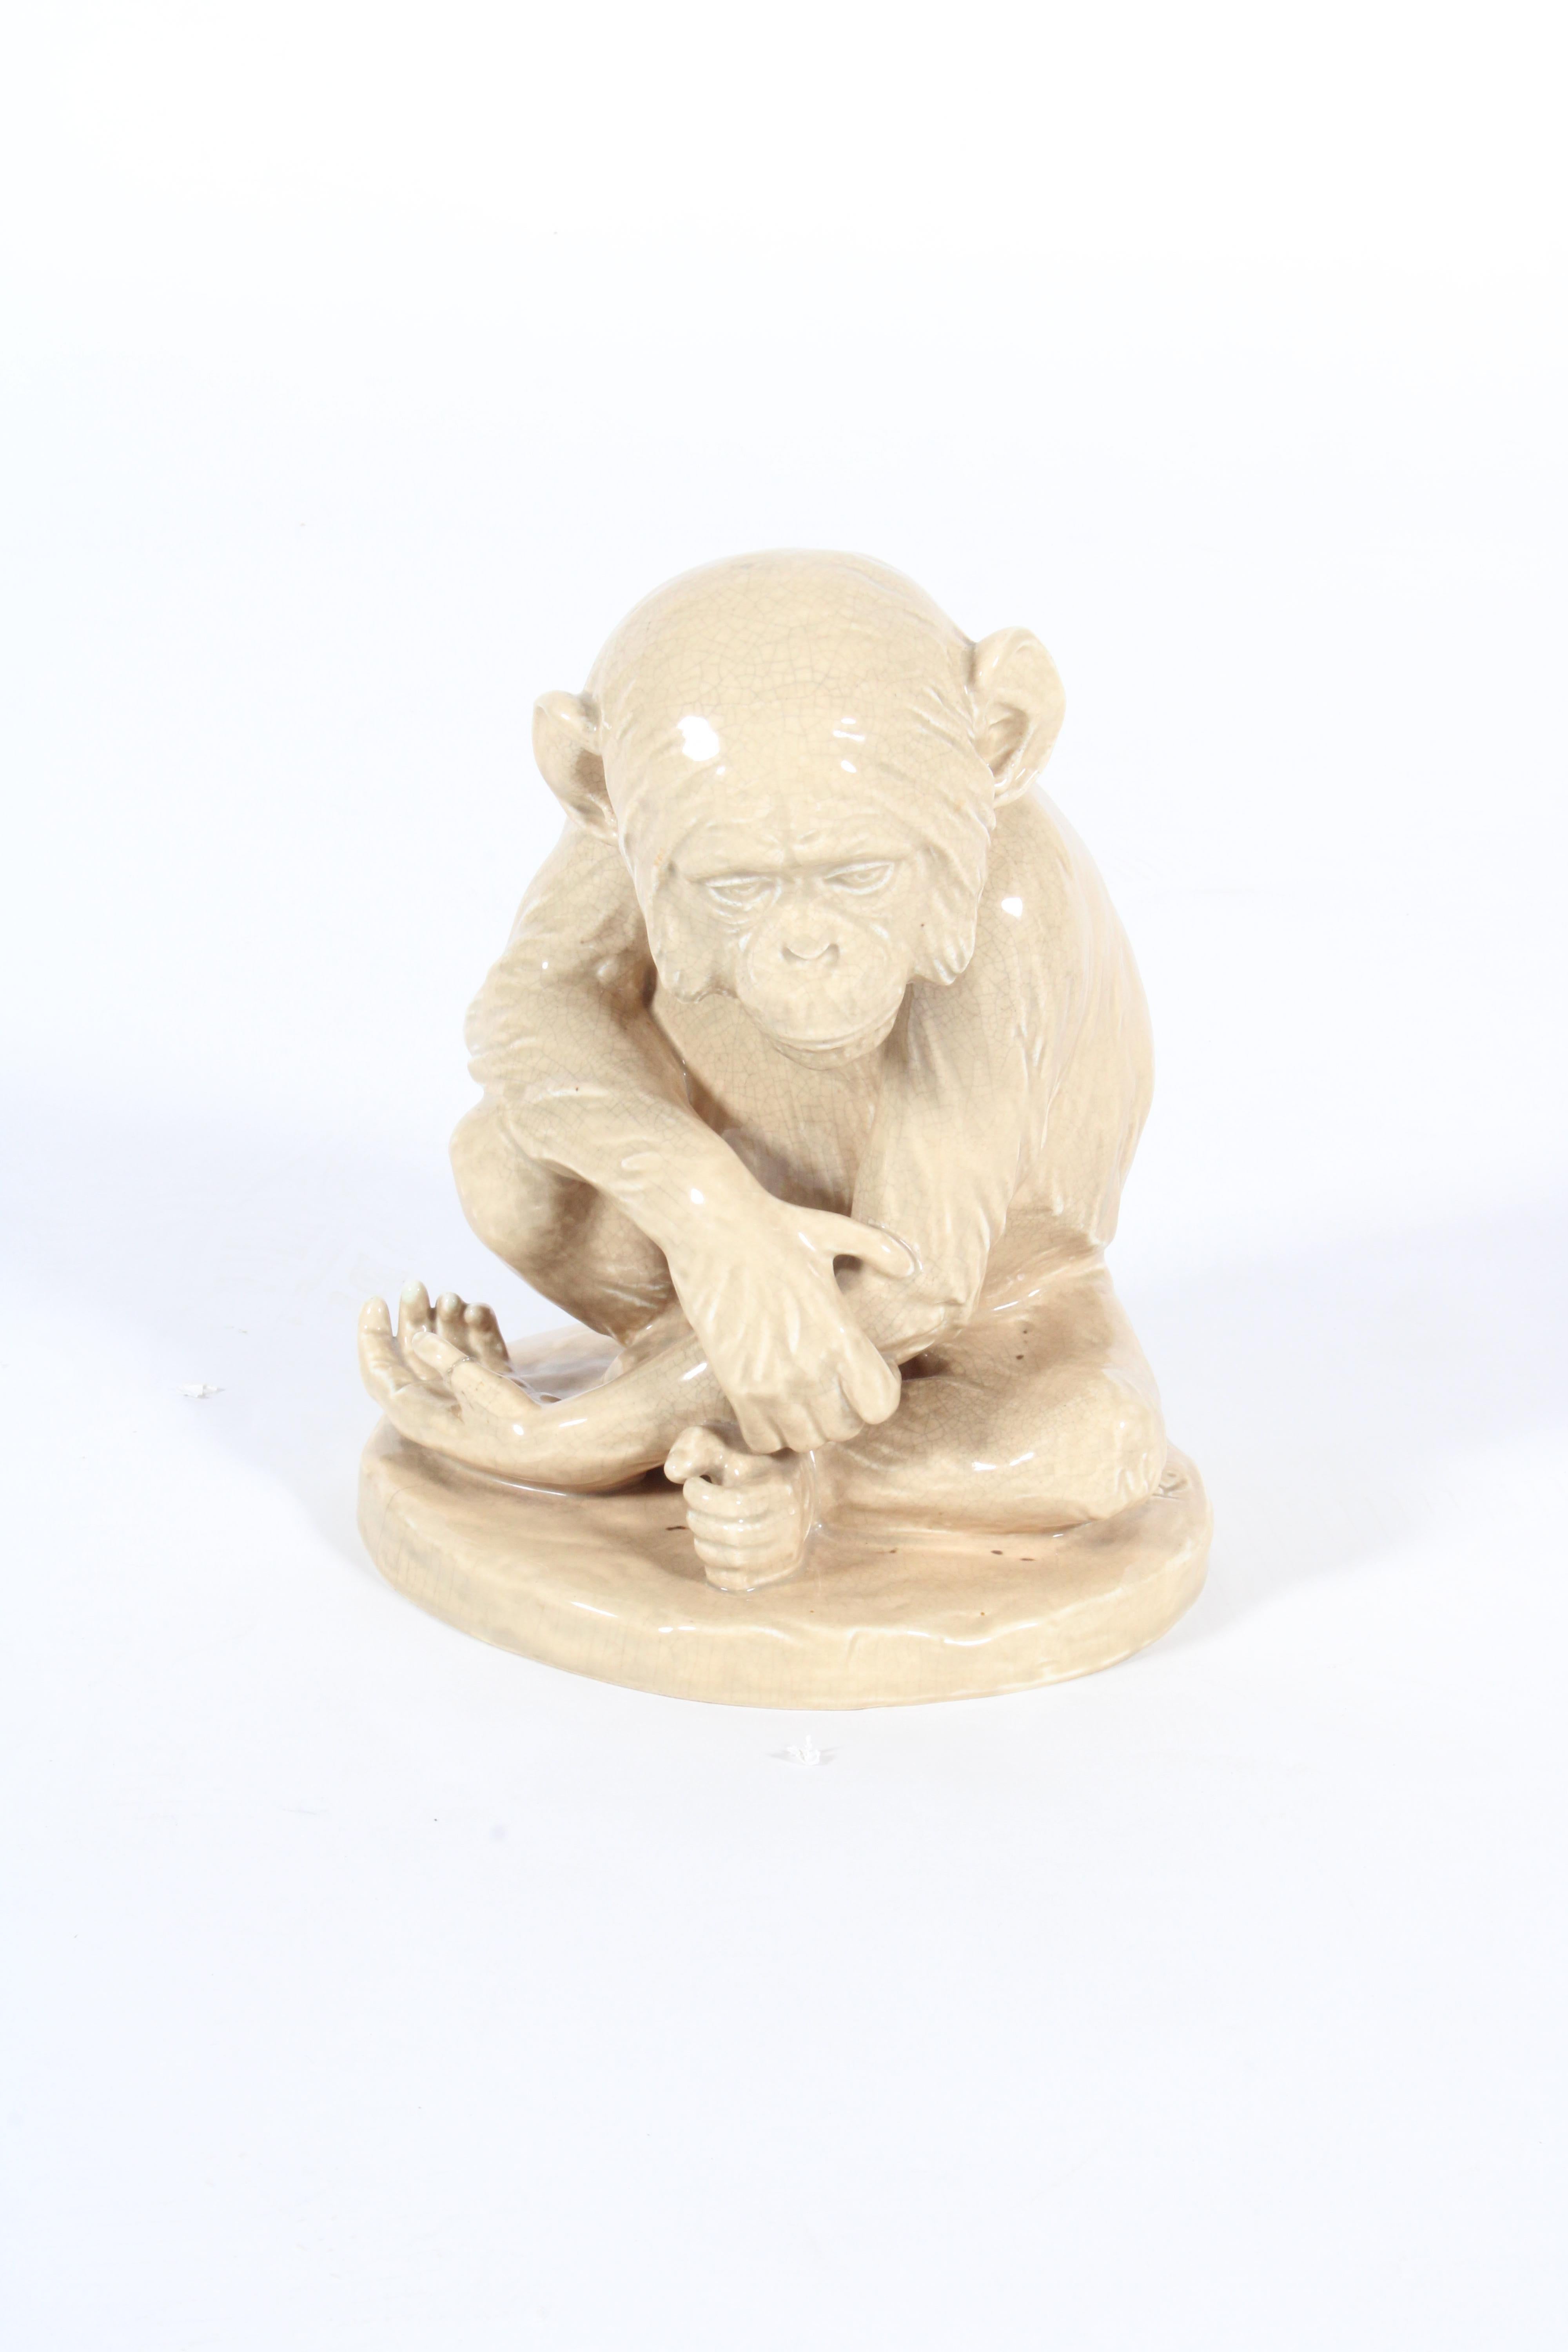 Charming Vintage Ceramic In The Form Of A Chimpanzee  *Free Worldwide Shipping 9